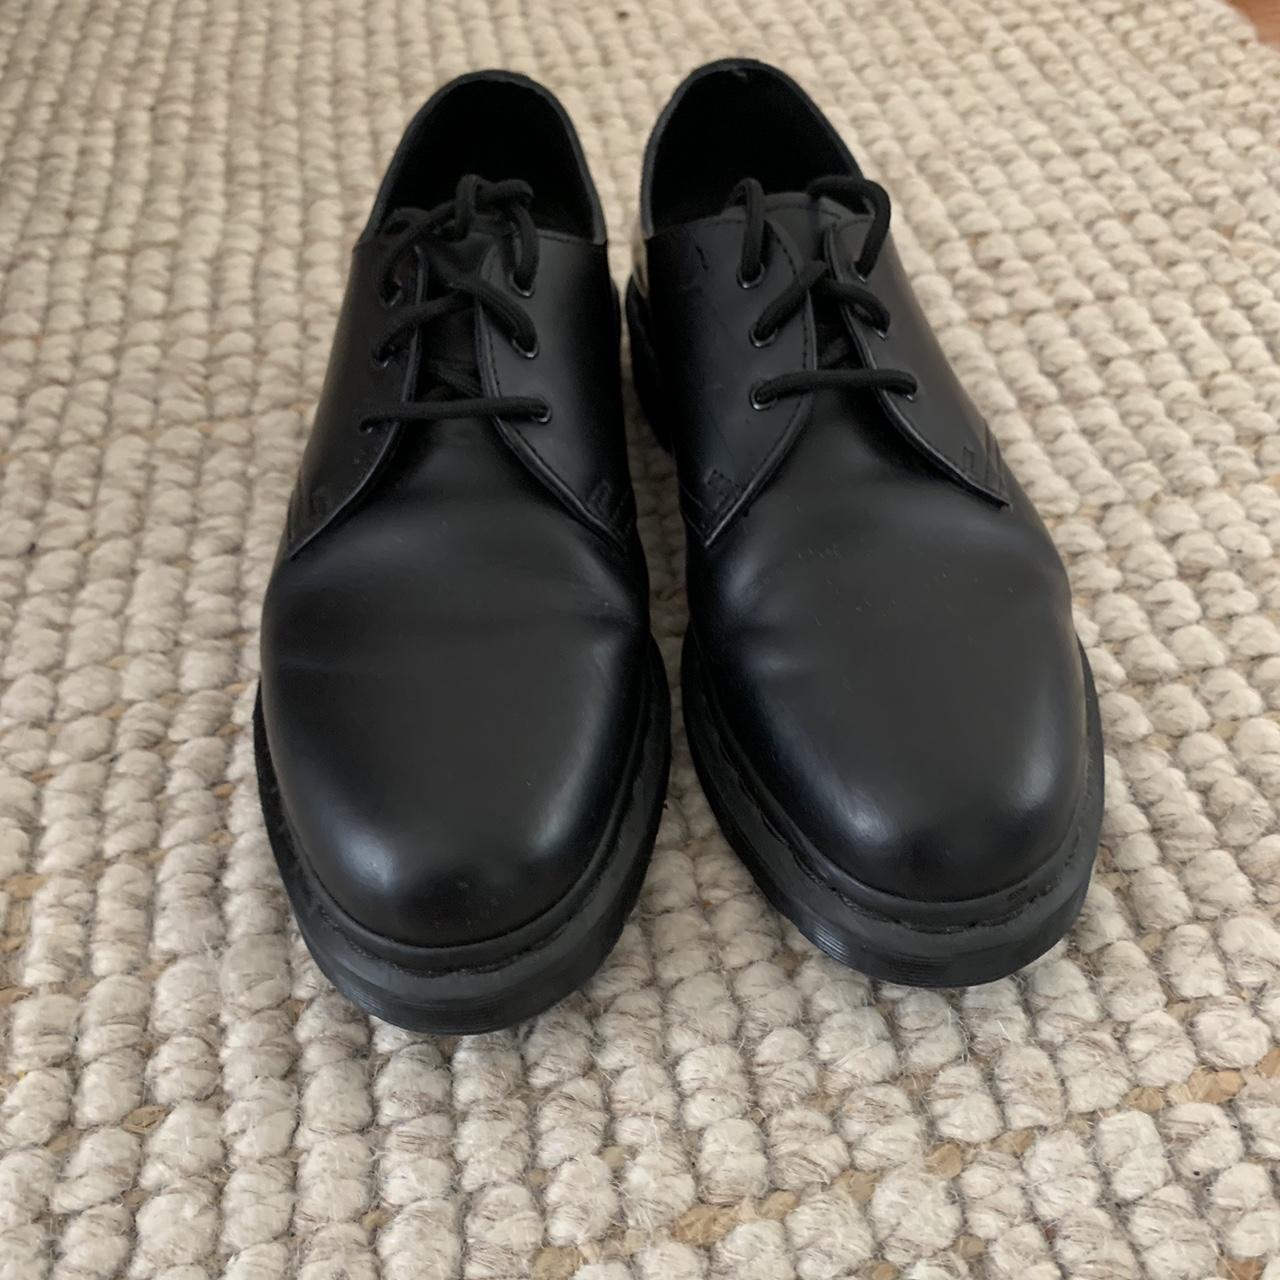 Dr Martens 1461 3-eye derby shoes Great condition.... - Depop